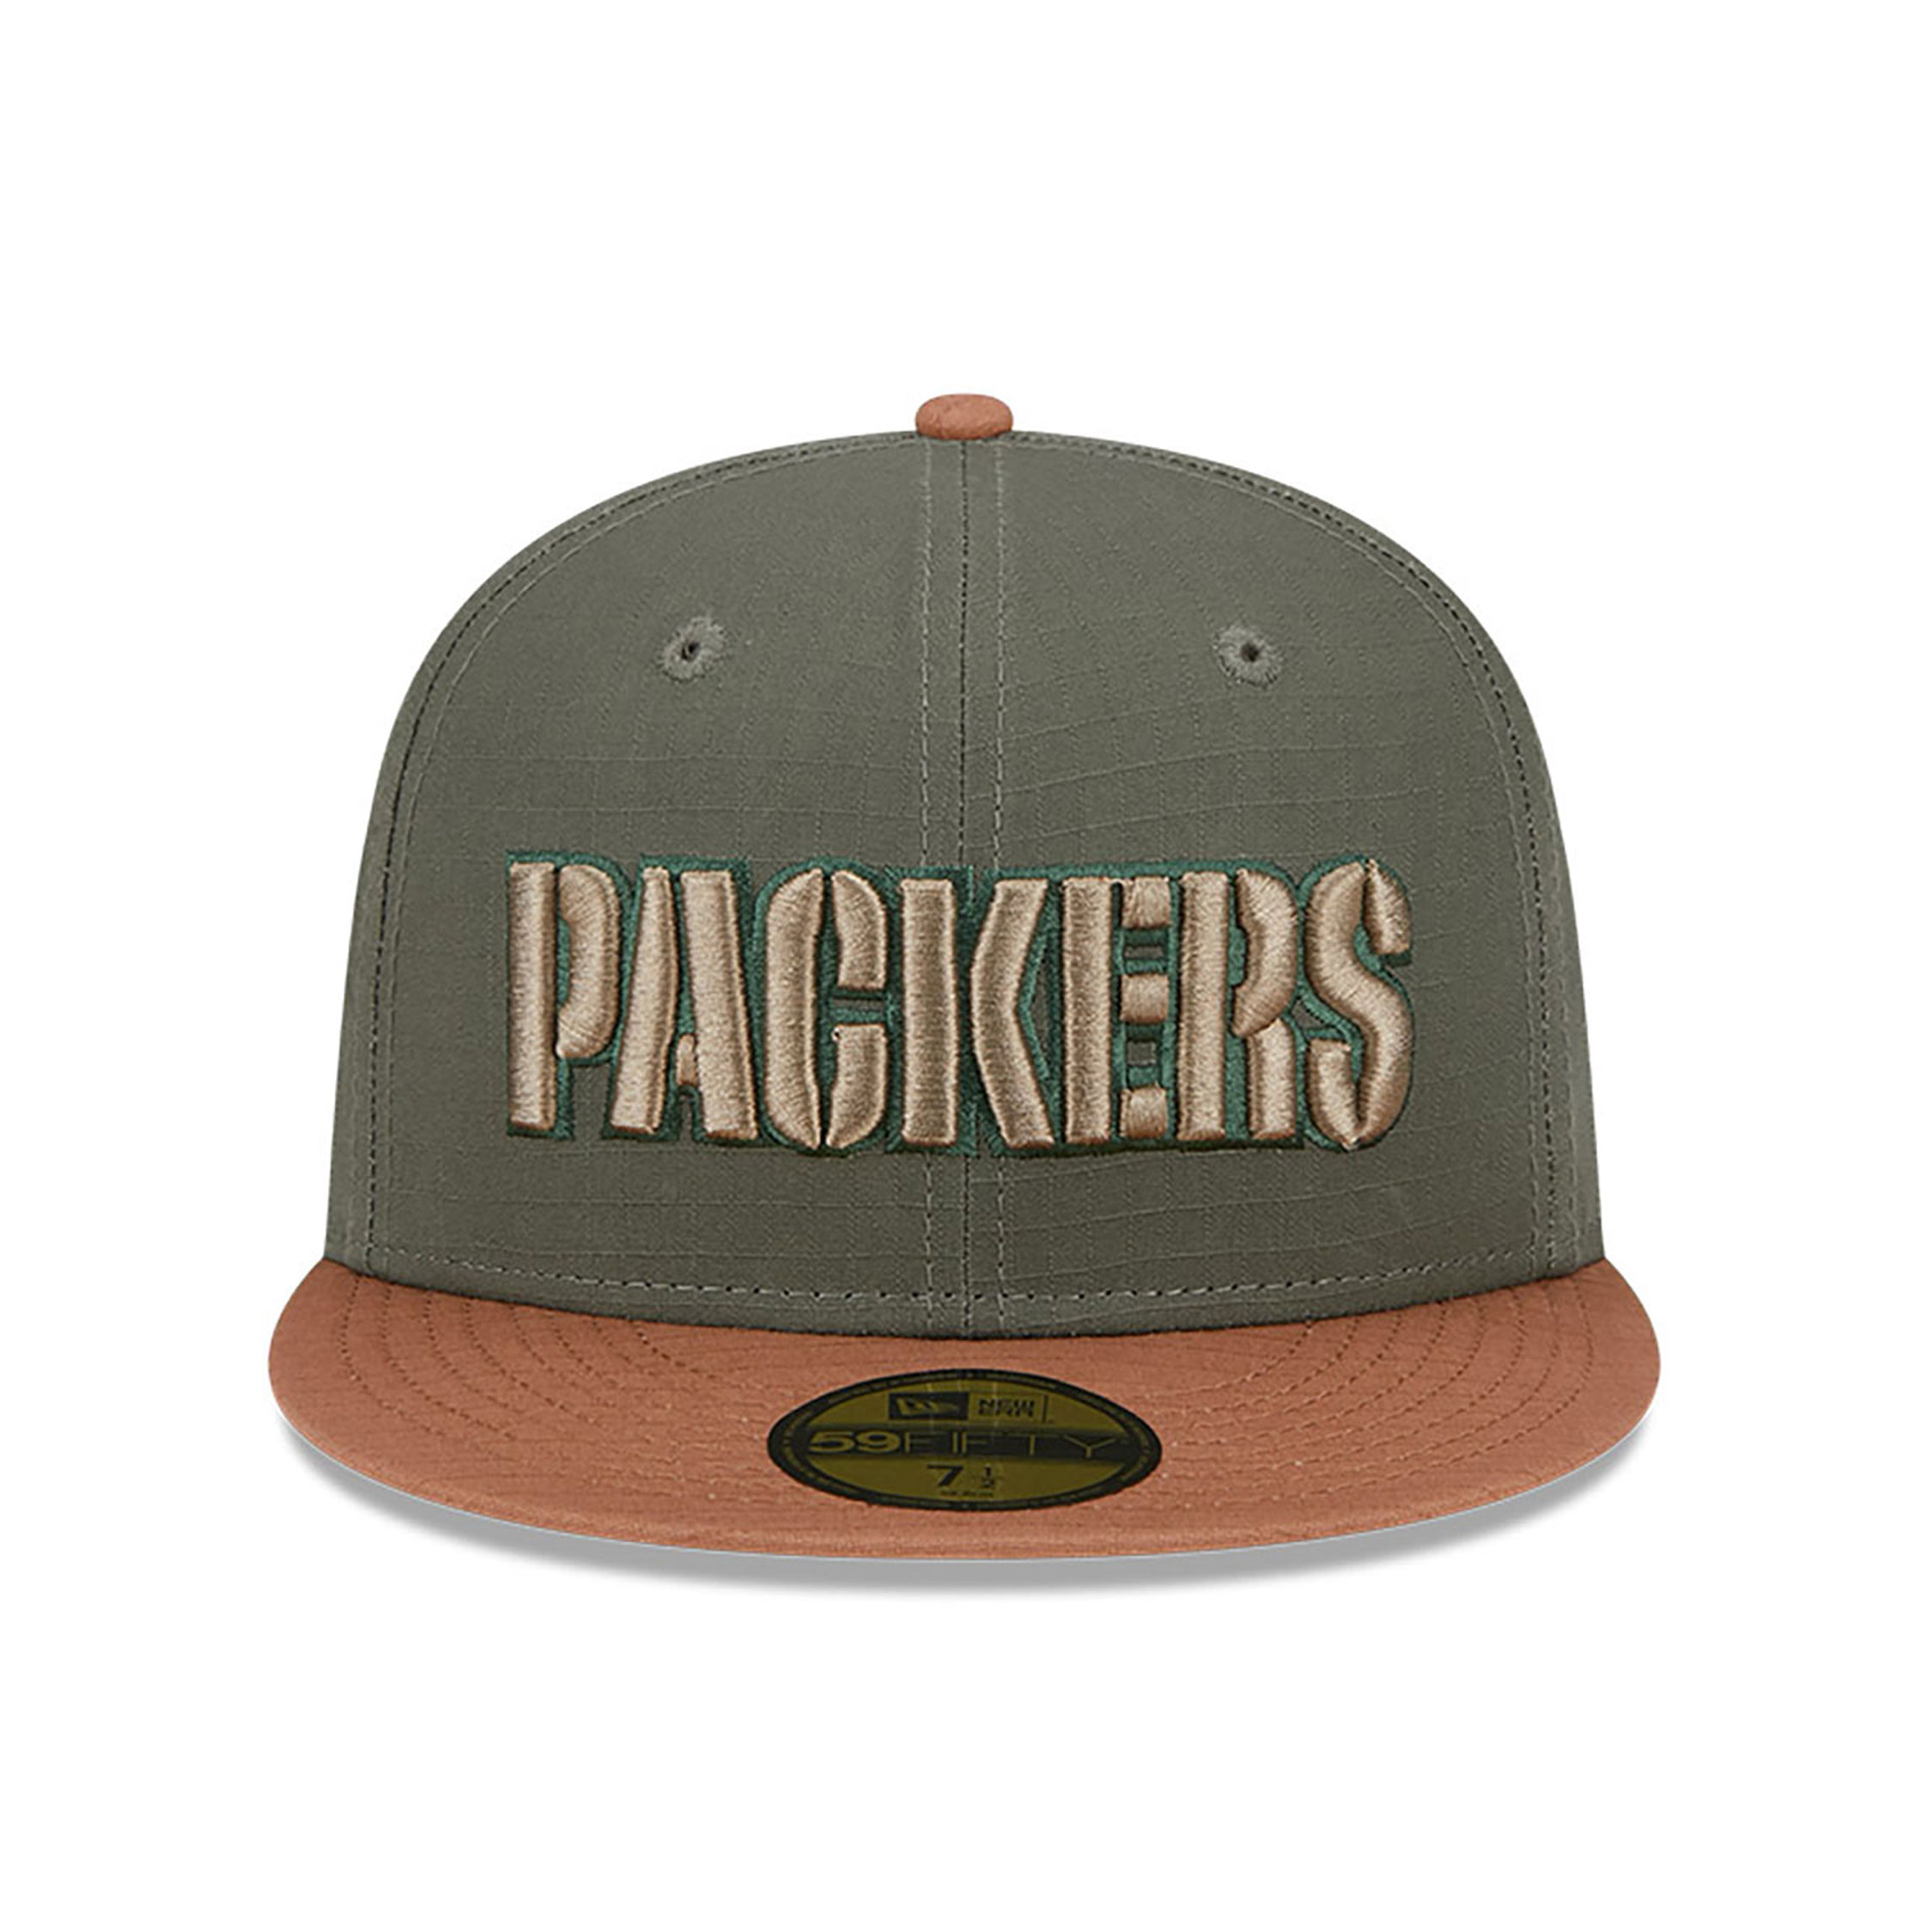 Green Bay Packers Ripstop Green 59FIFTY Fitted Cap